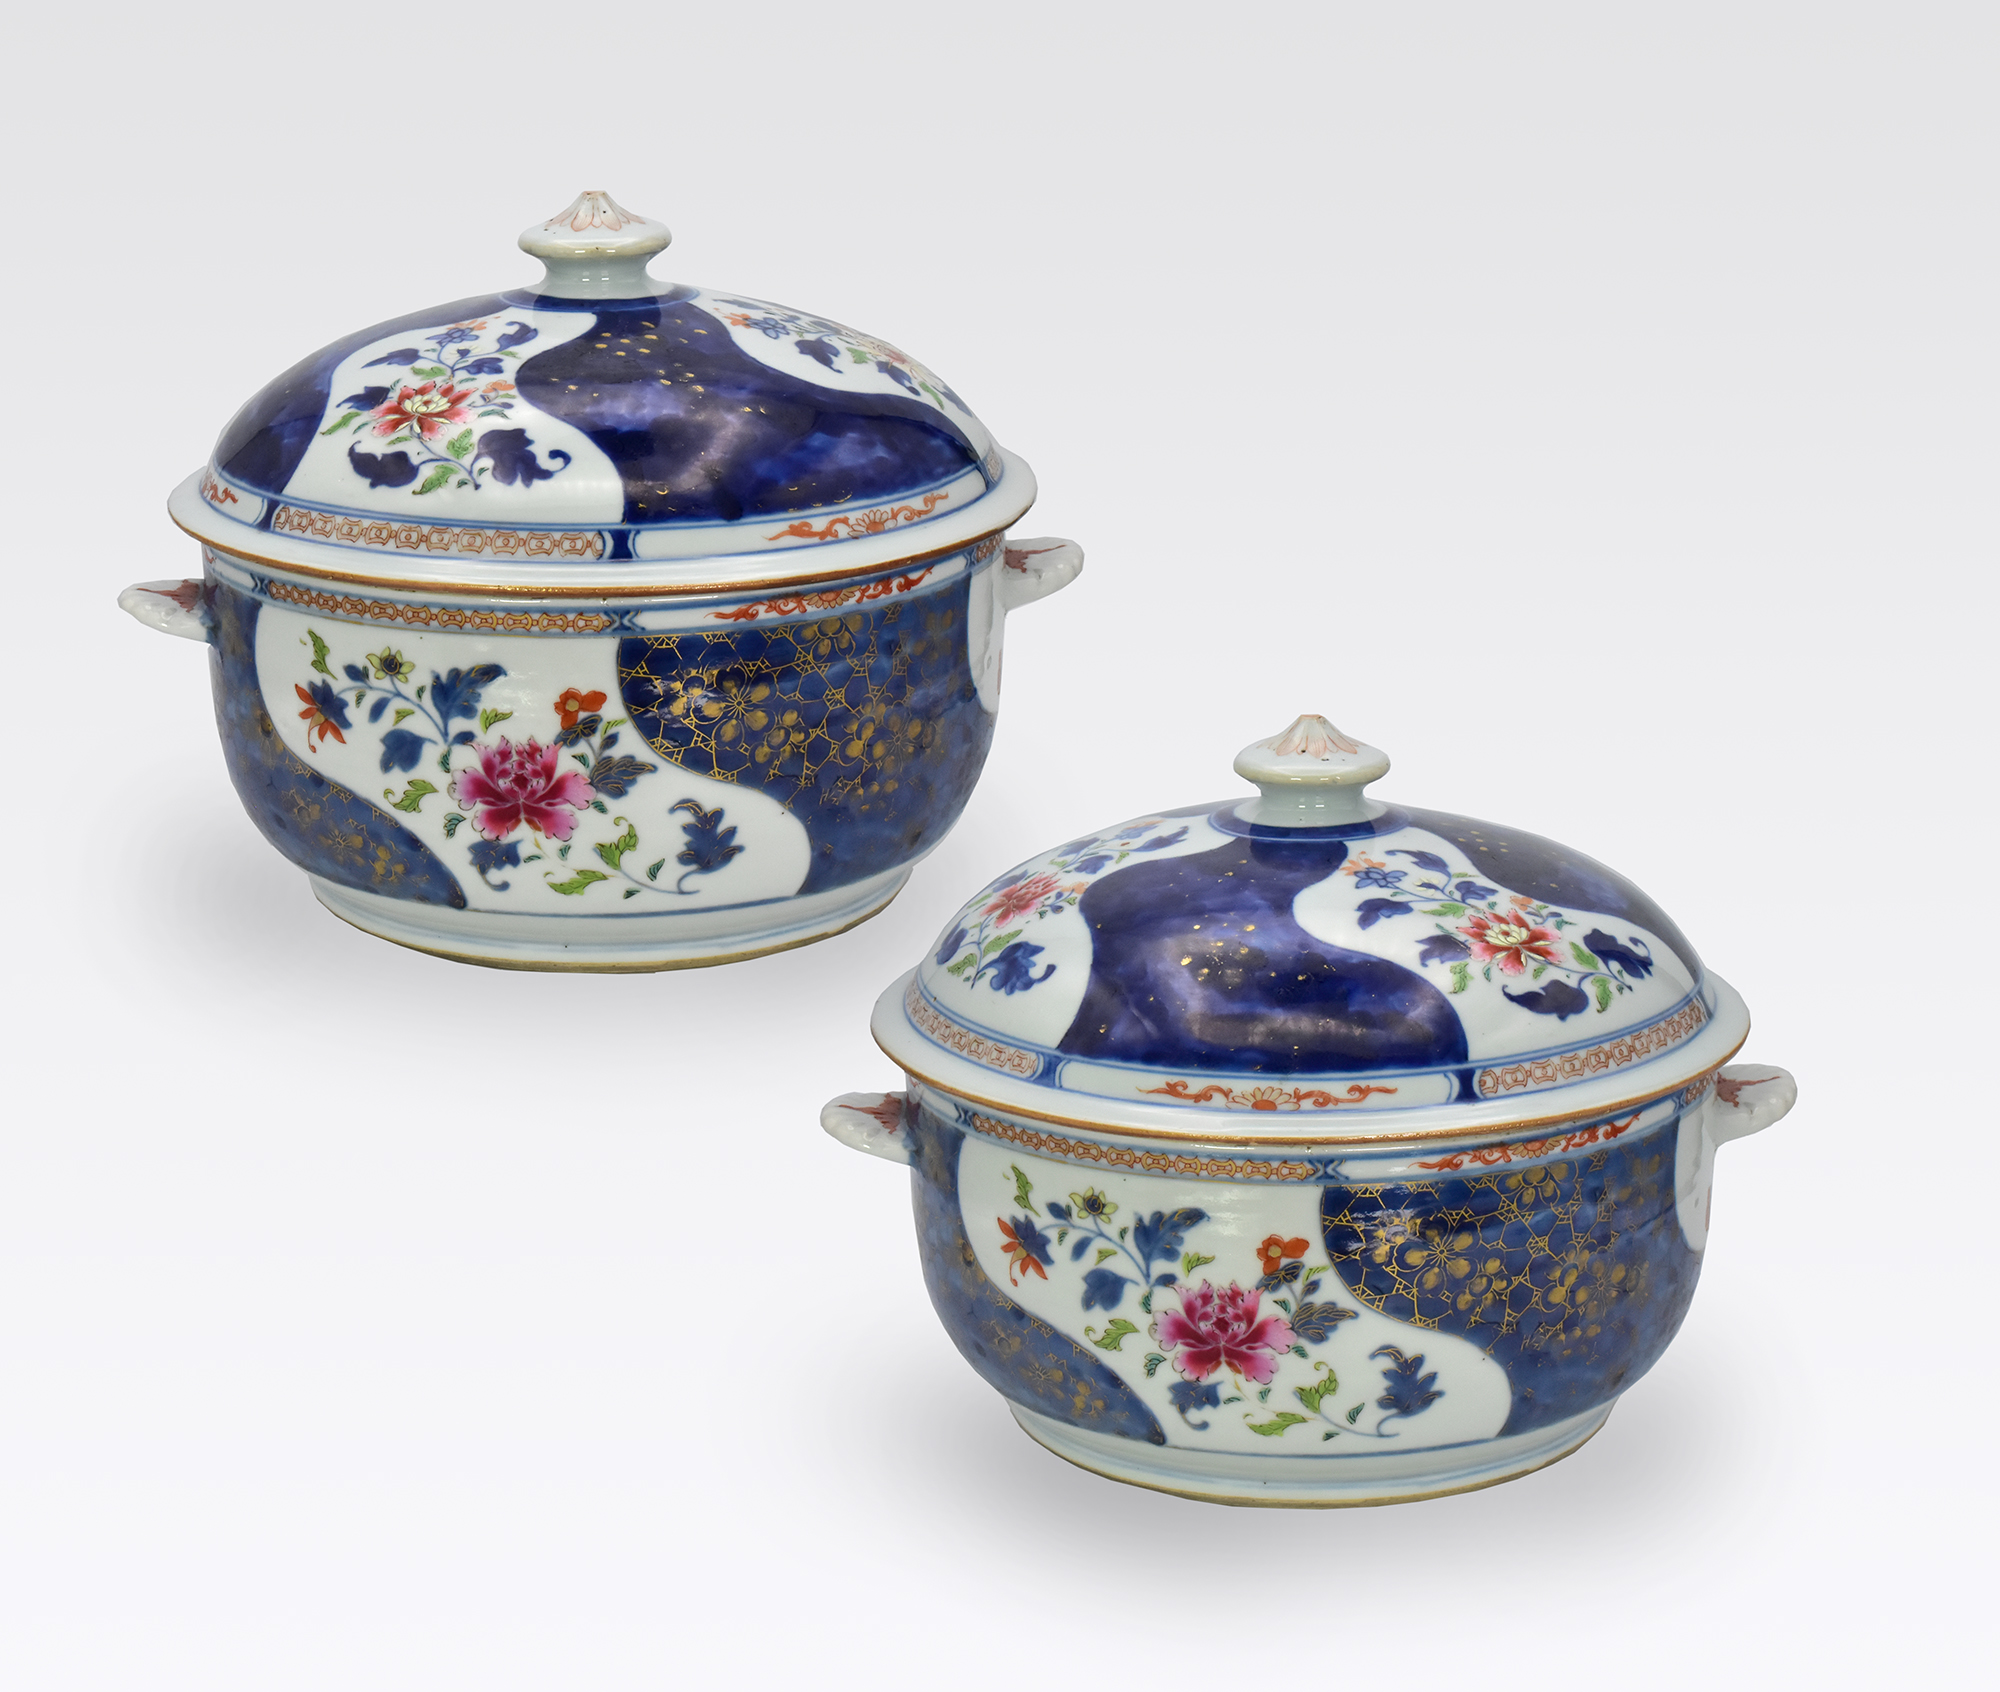 A PAIR OF CHINESE EXPORT ‘FAMILLE-ROSE’ PORCELAIN TUREENS AND COVERS, QIANLONG PERIOD, 1736 – 1795